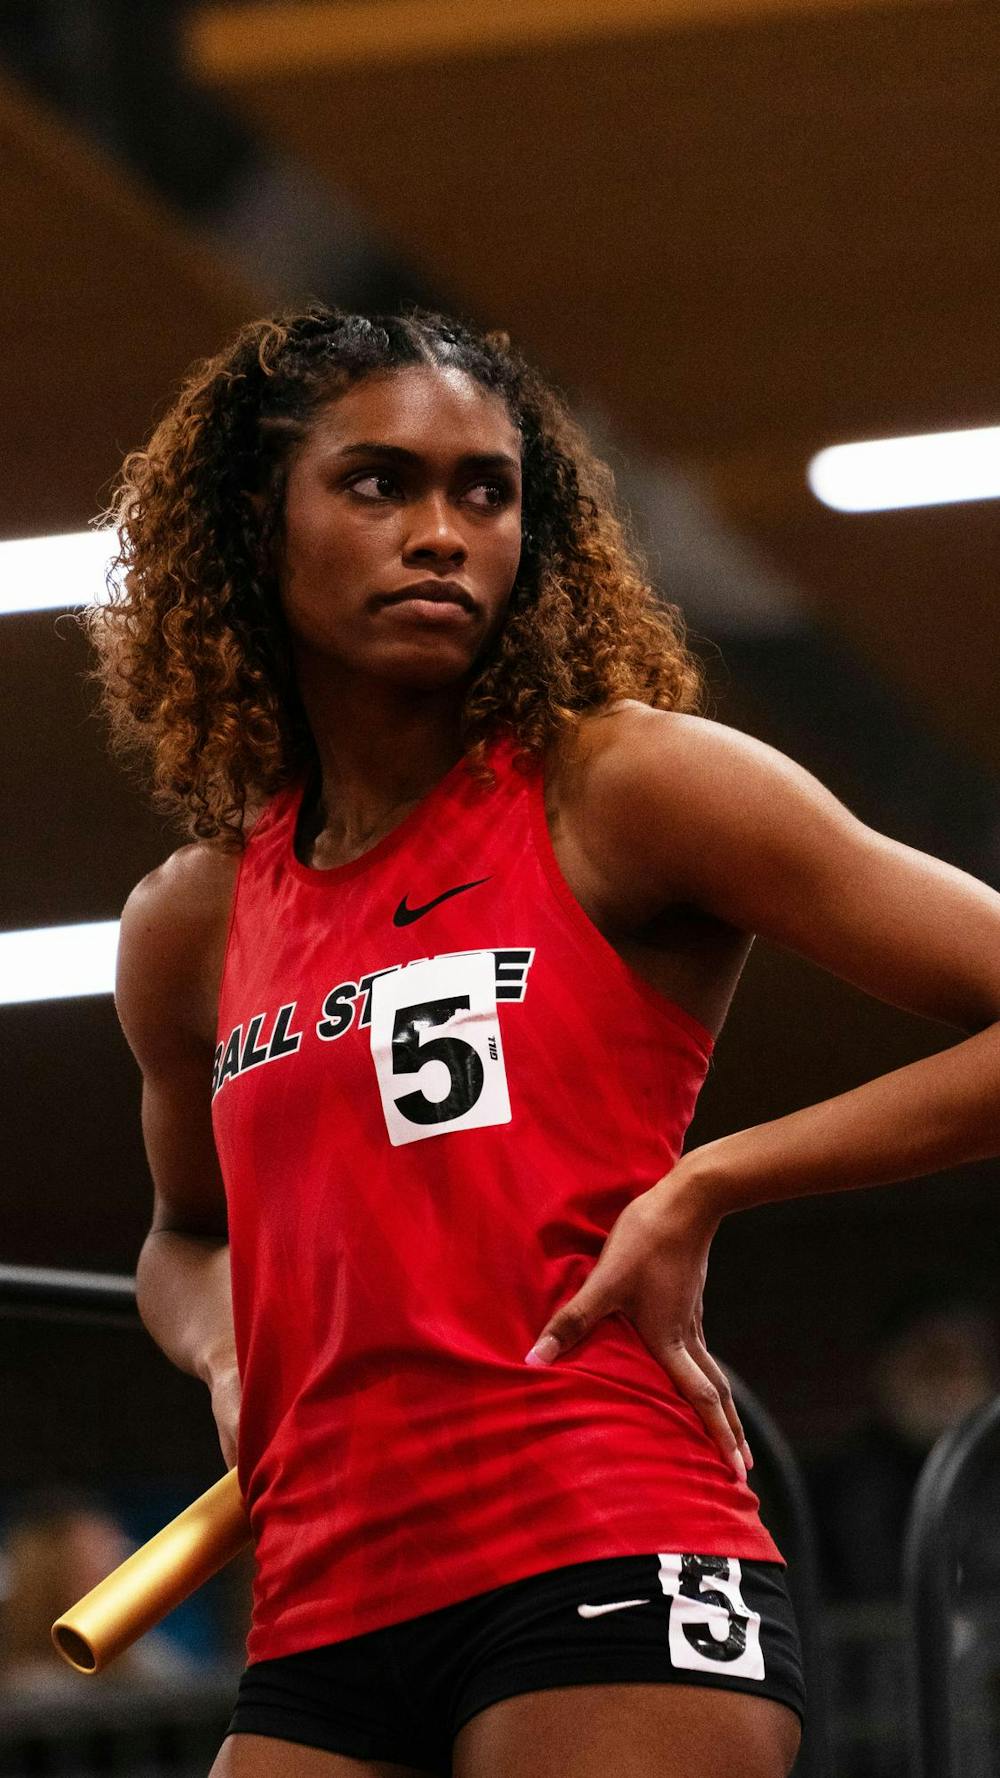 Senior sprinter Alexis Thigpen prepares to run the first leg of the 4x400 relay race at the IUPUI Invitational Jan. 27 at the Indiana State Fairgrounds in Indianapolis. The 4x400 relay race team placed first overall in the invitational. Amadou Diallo, DN